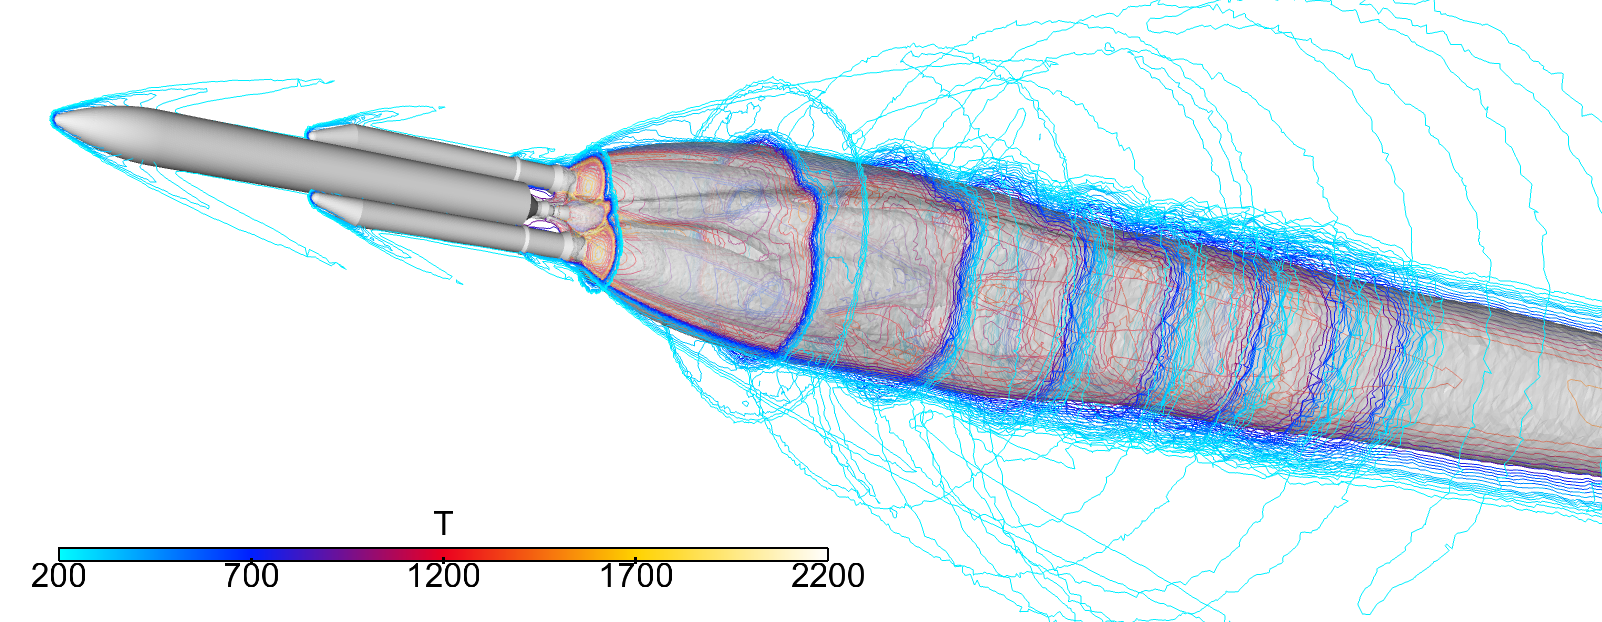 Isolines of temperature surrounding Ariane 5 and its plume. Computed by Onera using the CEDRE CFD code